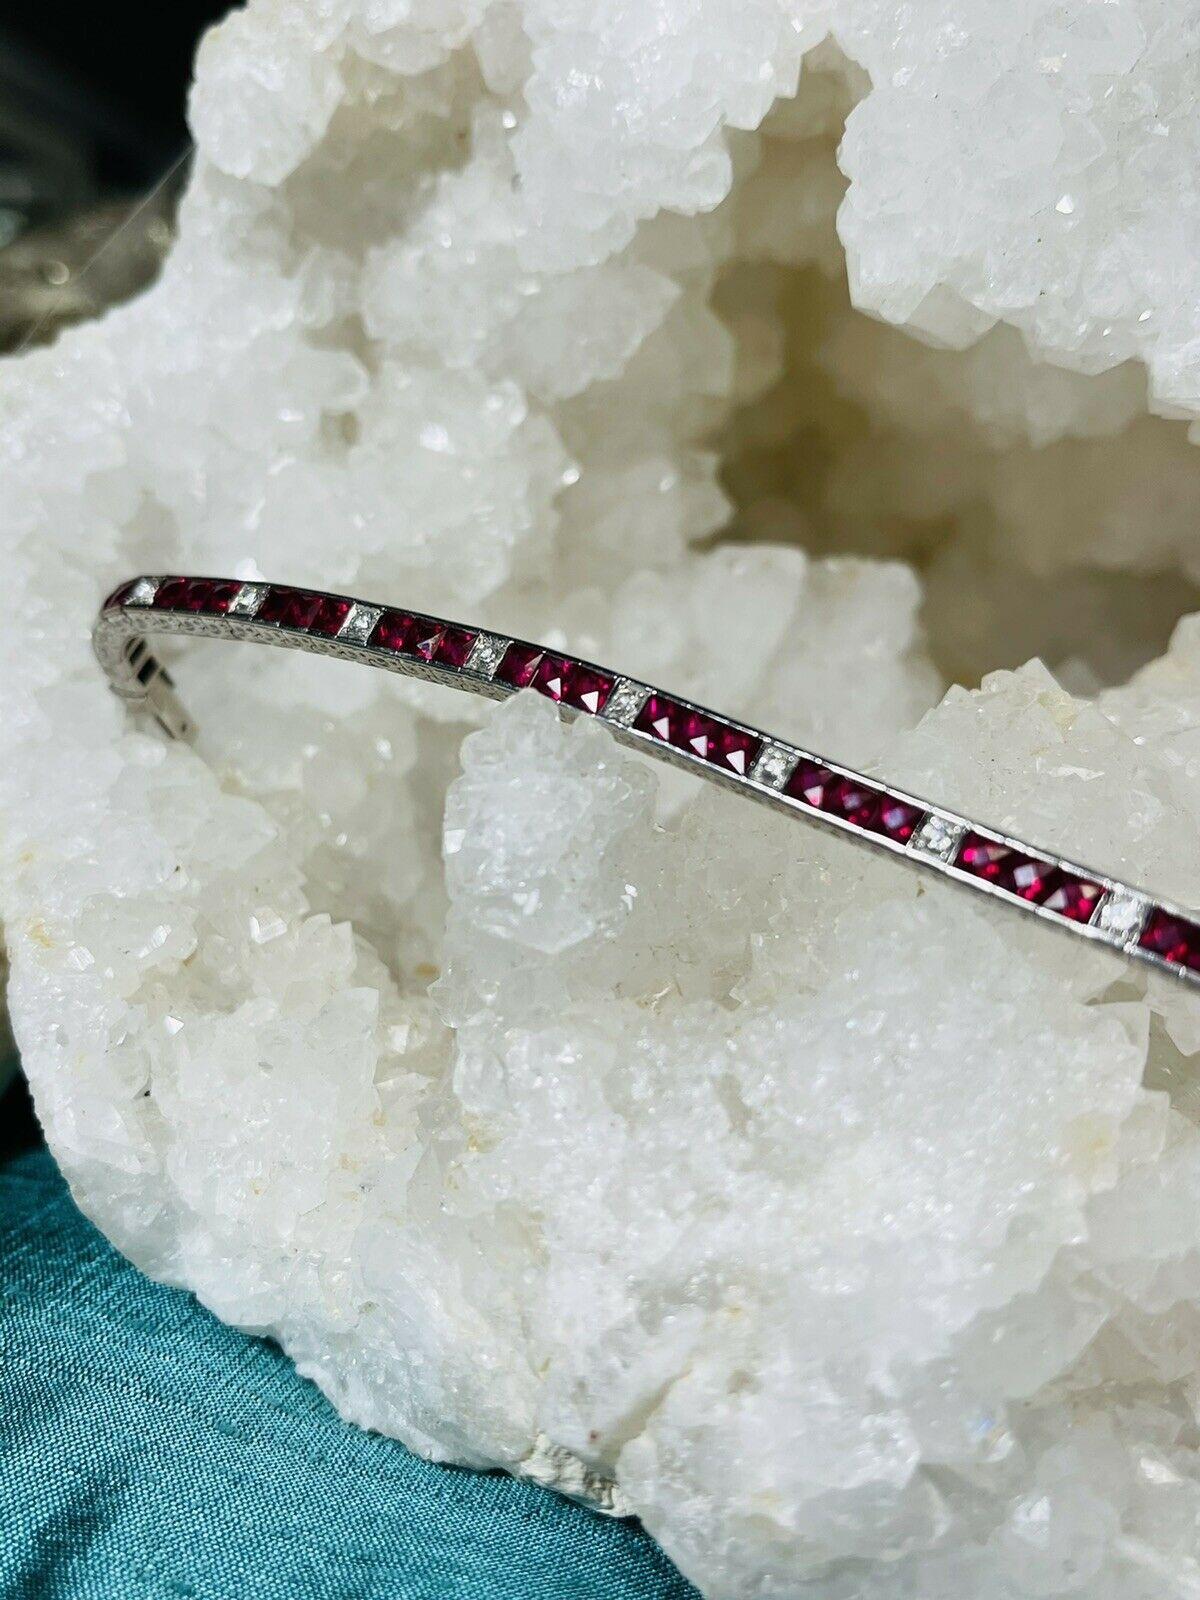 18K White Gold Square French Cut Burma Natural Rubies Diamond Tennis Bracelet In Excellent Condition For Sale In Addison, TX